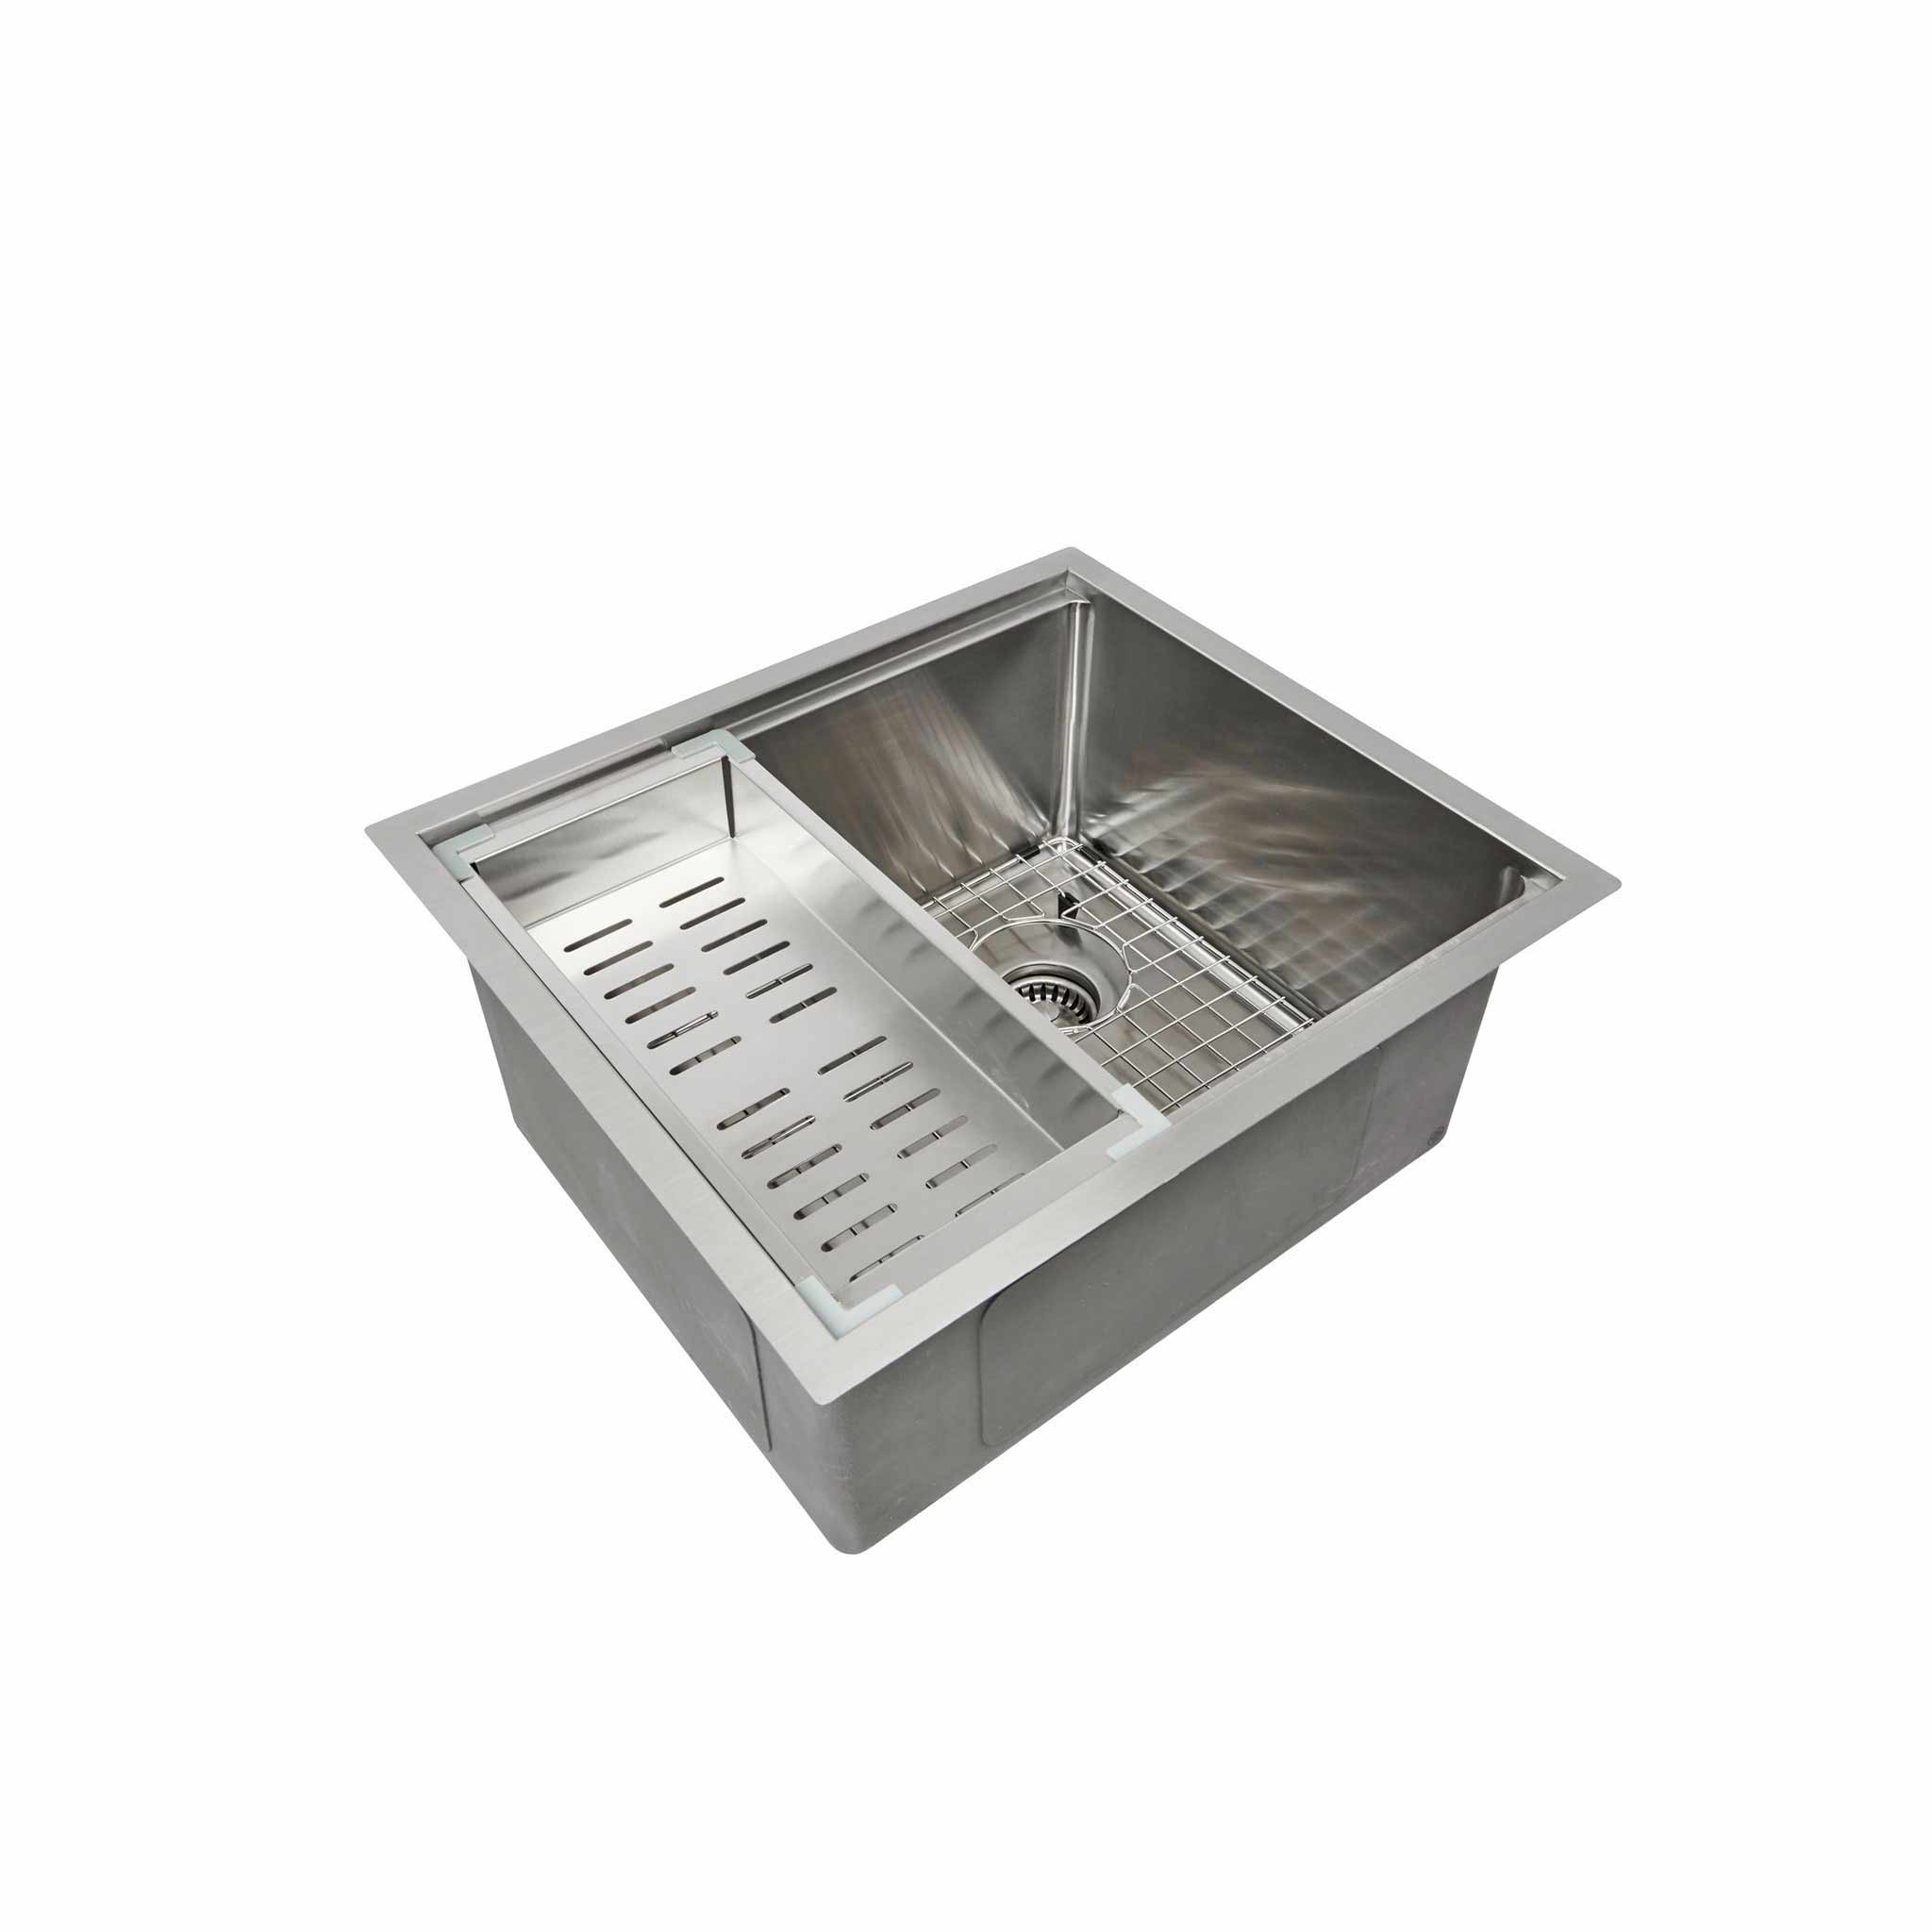 22”, stainless steel workstation prep sink with offset seamless drain, basin grid, and colander accessory for the built in ledge.